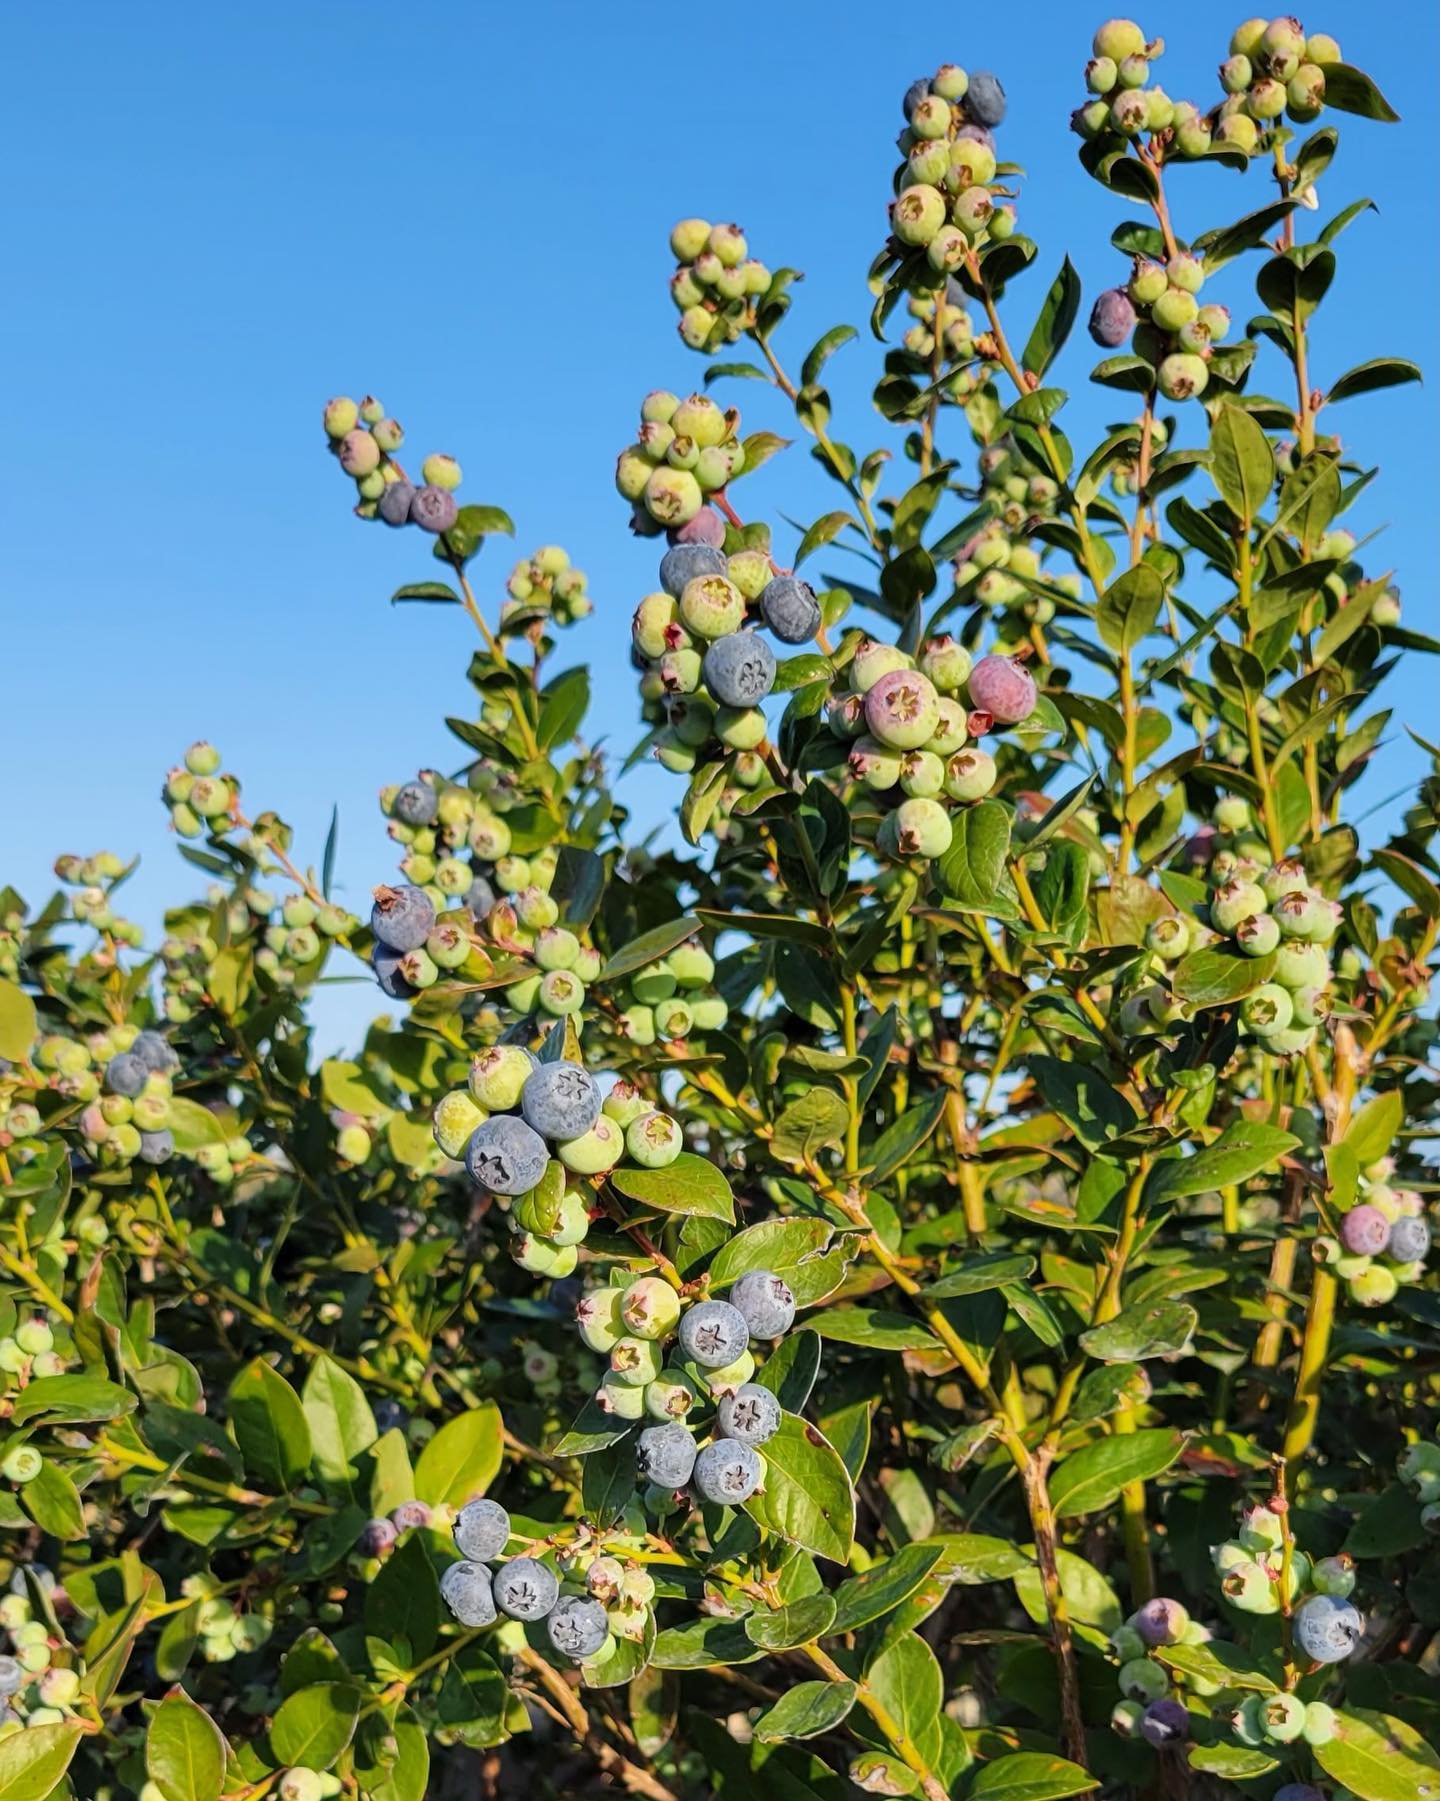 It’s time to welcome Florida blueberries back into the game!